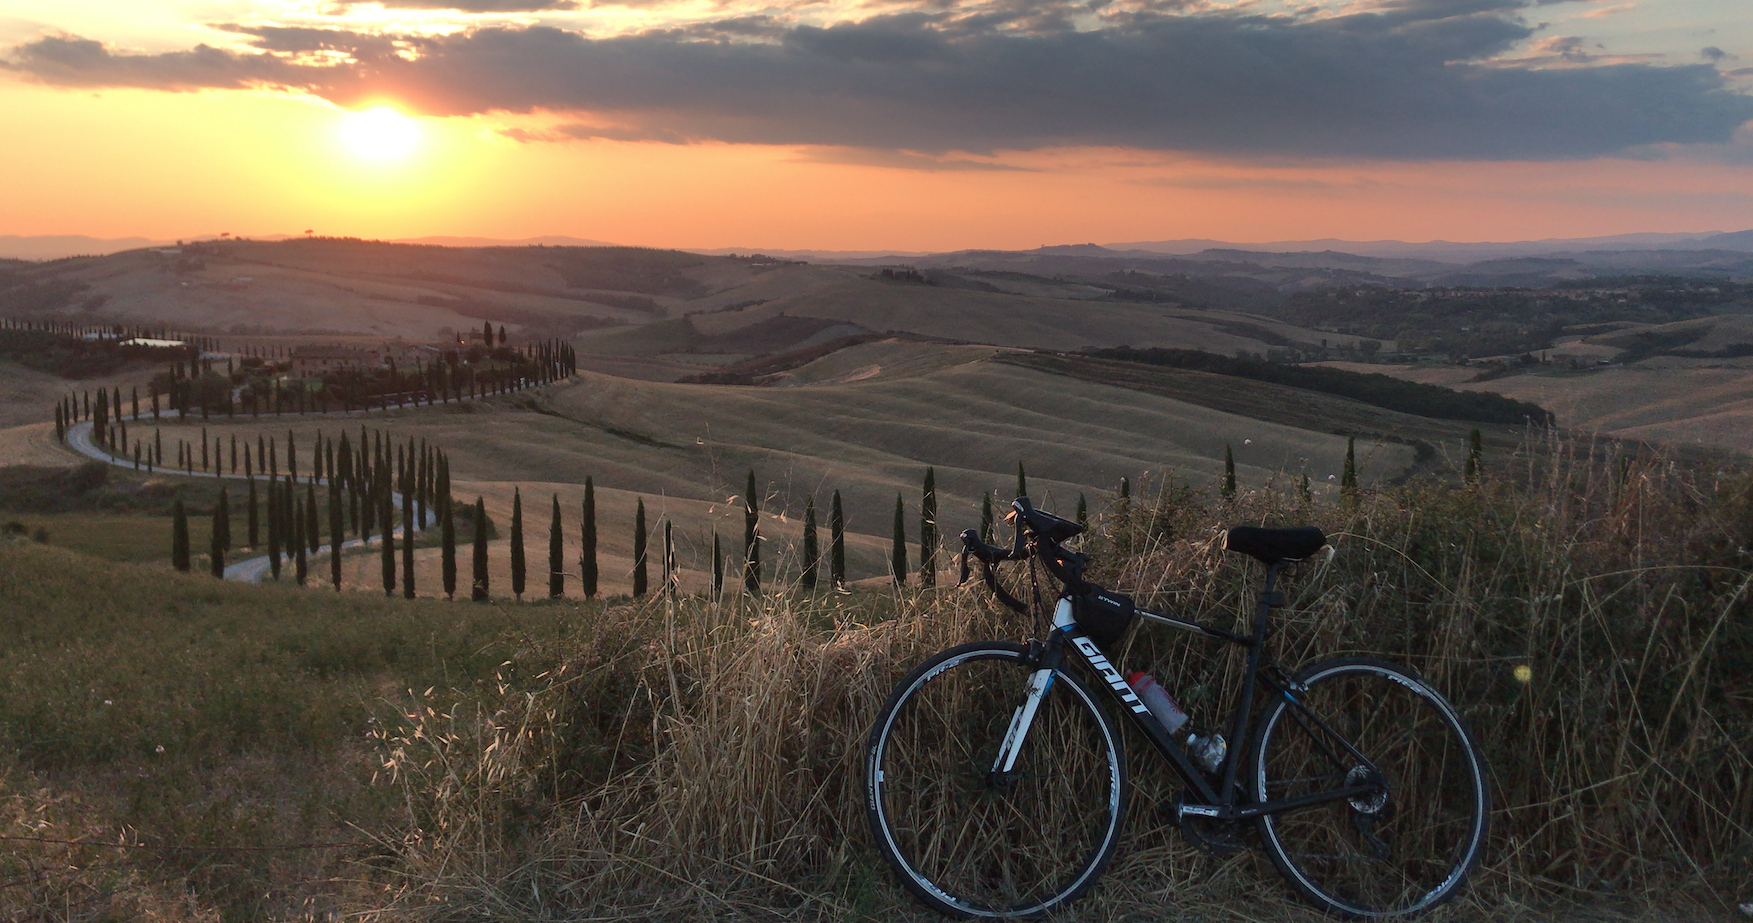 Flavia from Bucharest waiting sunset riding Siena hills